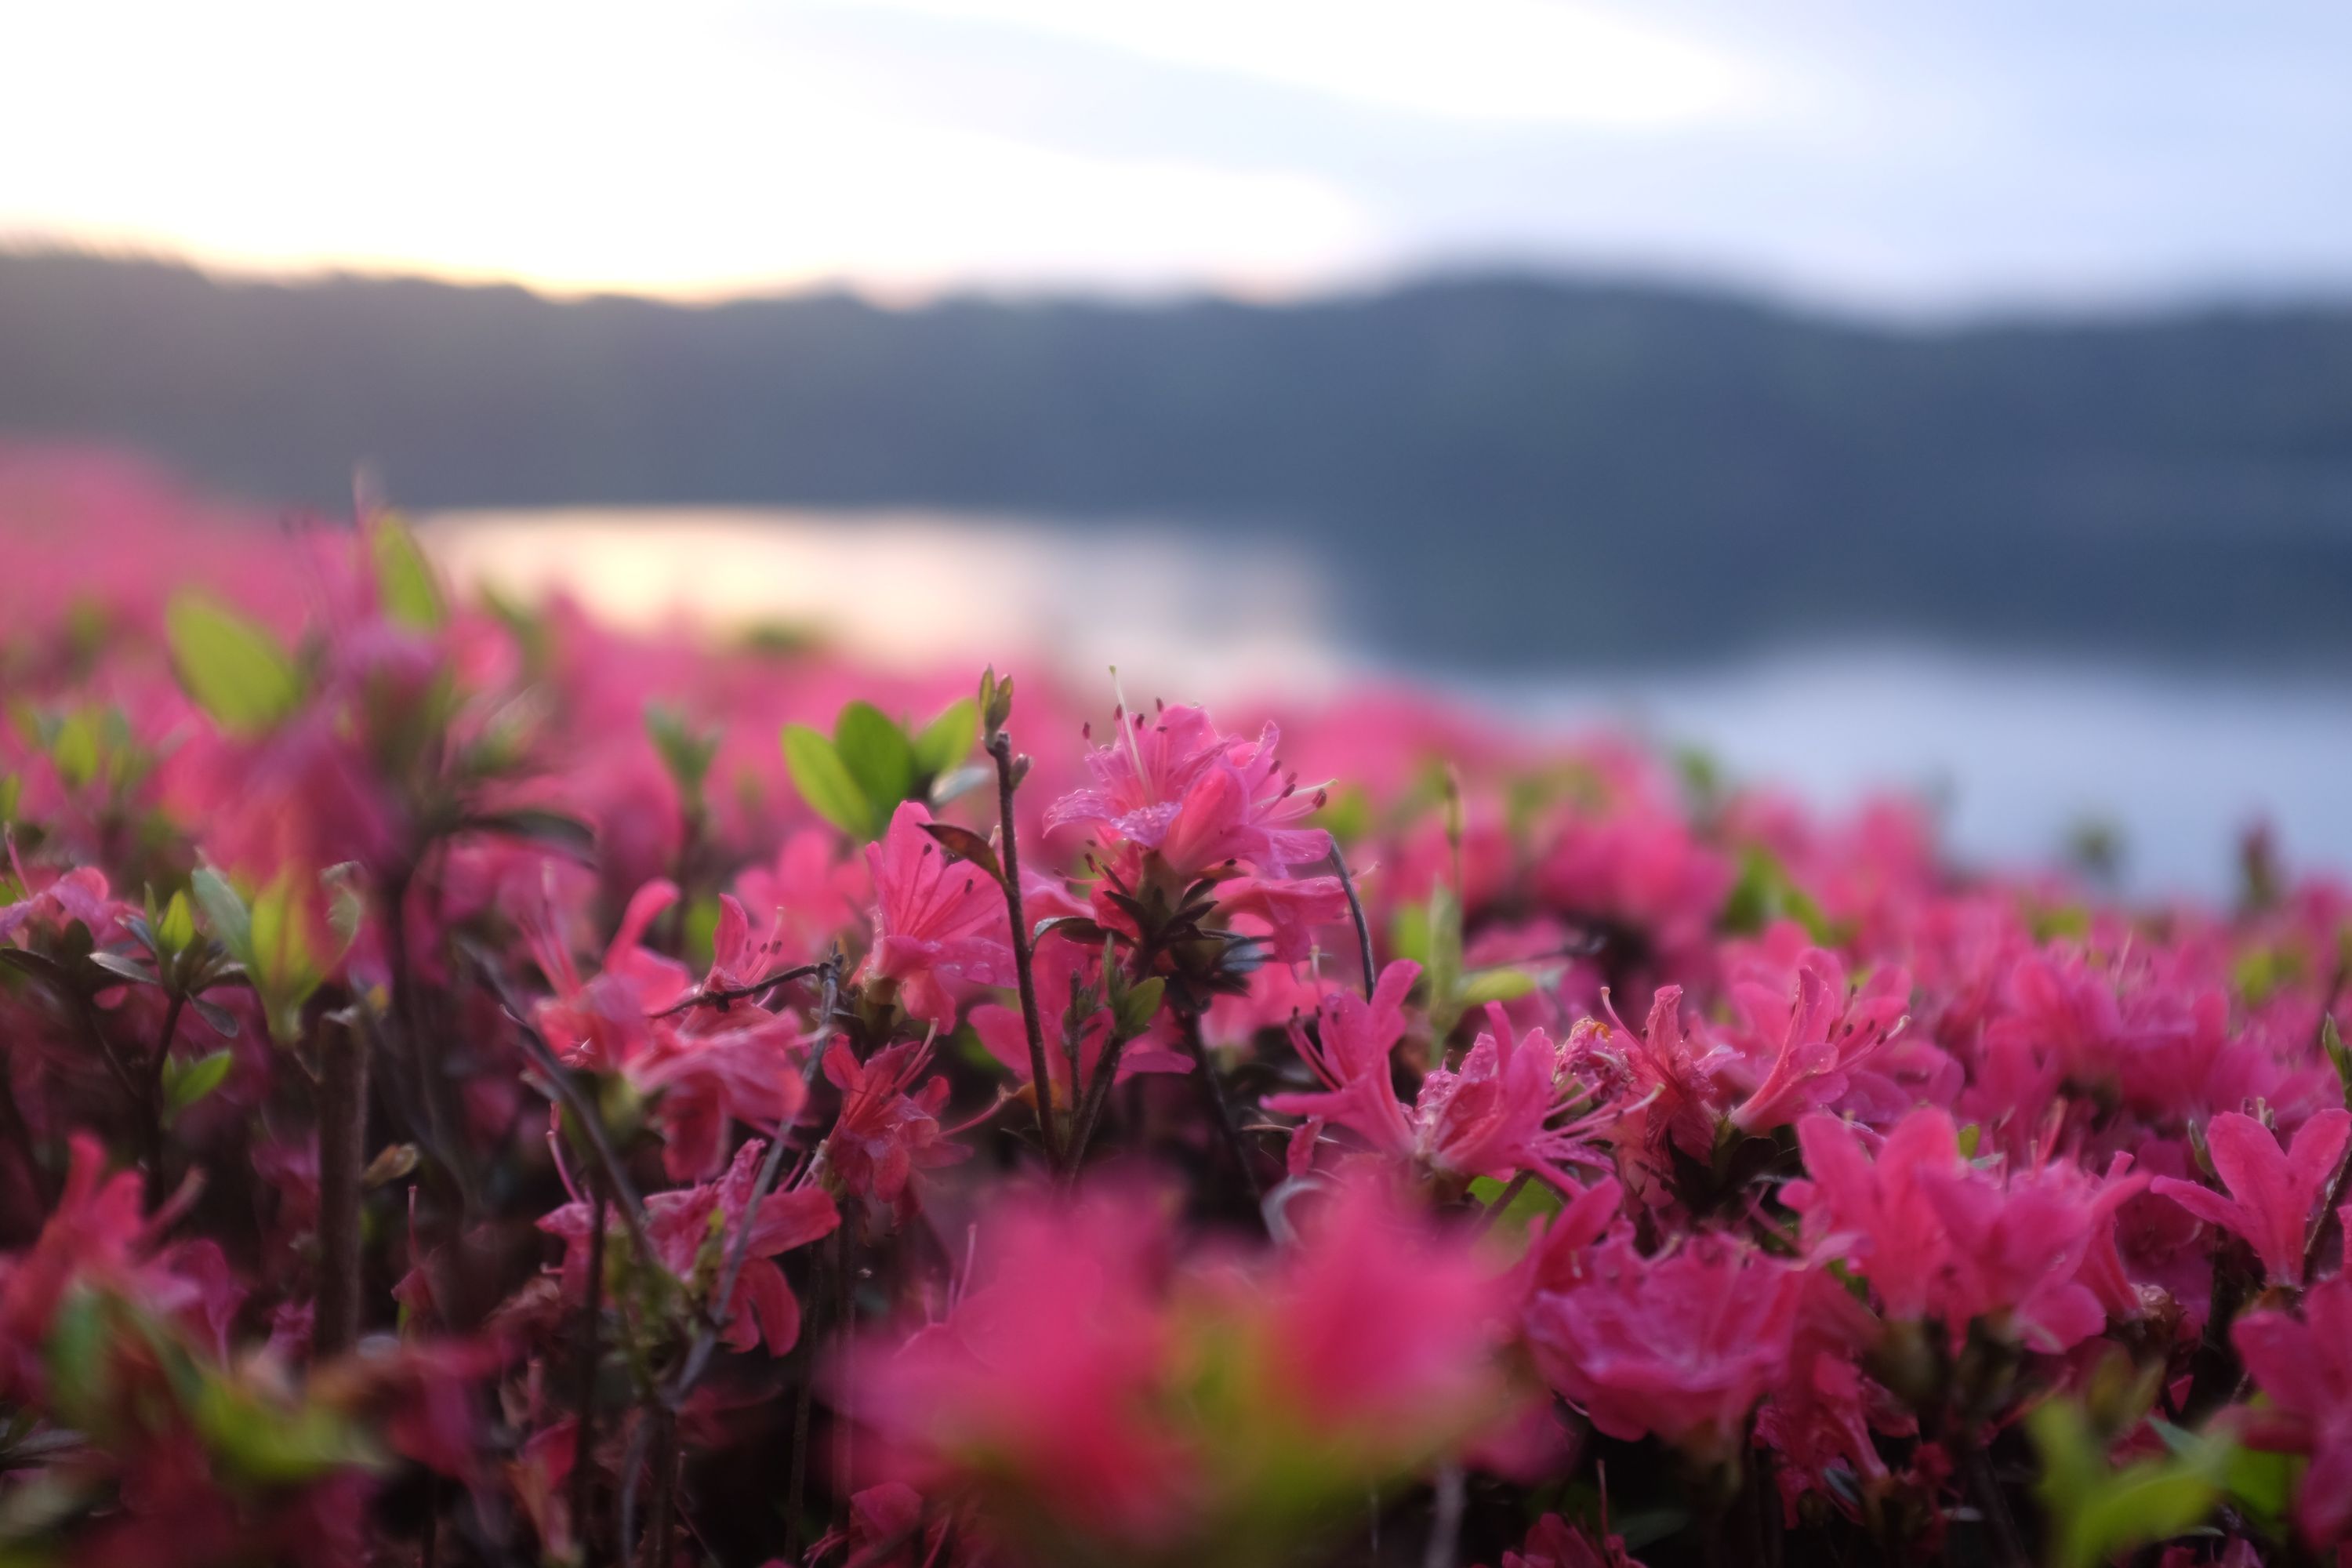 Blooming azaleas on the shore of round lake in the early morning light.